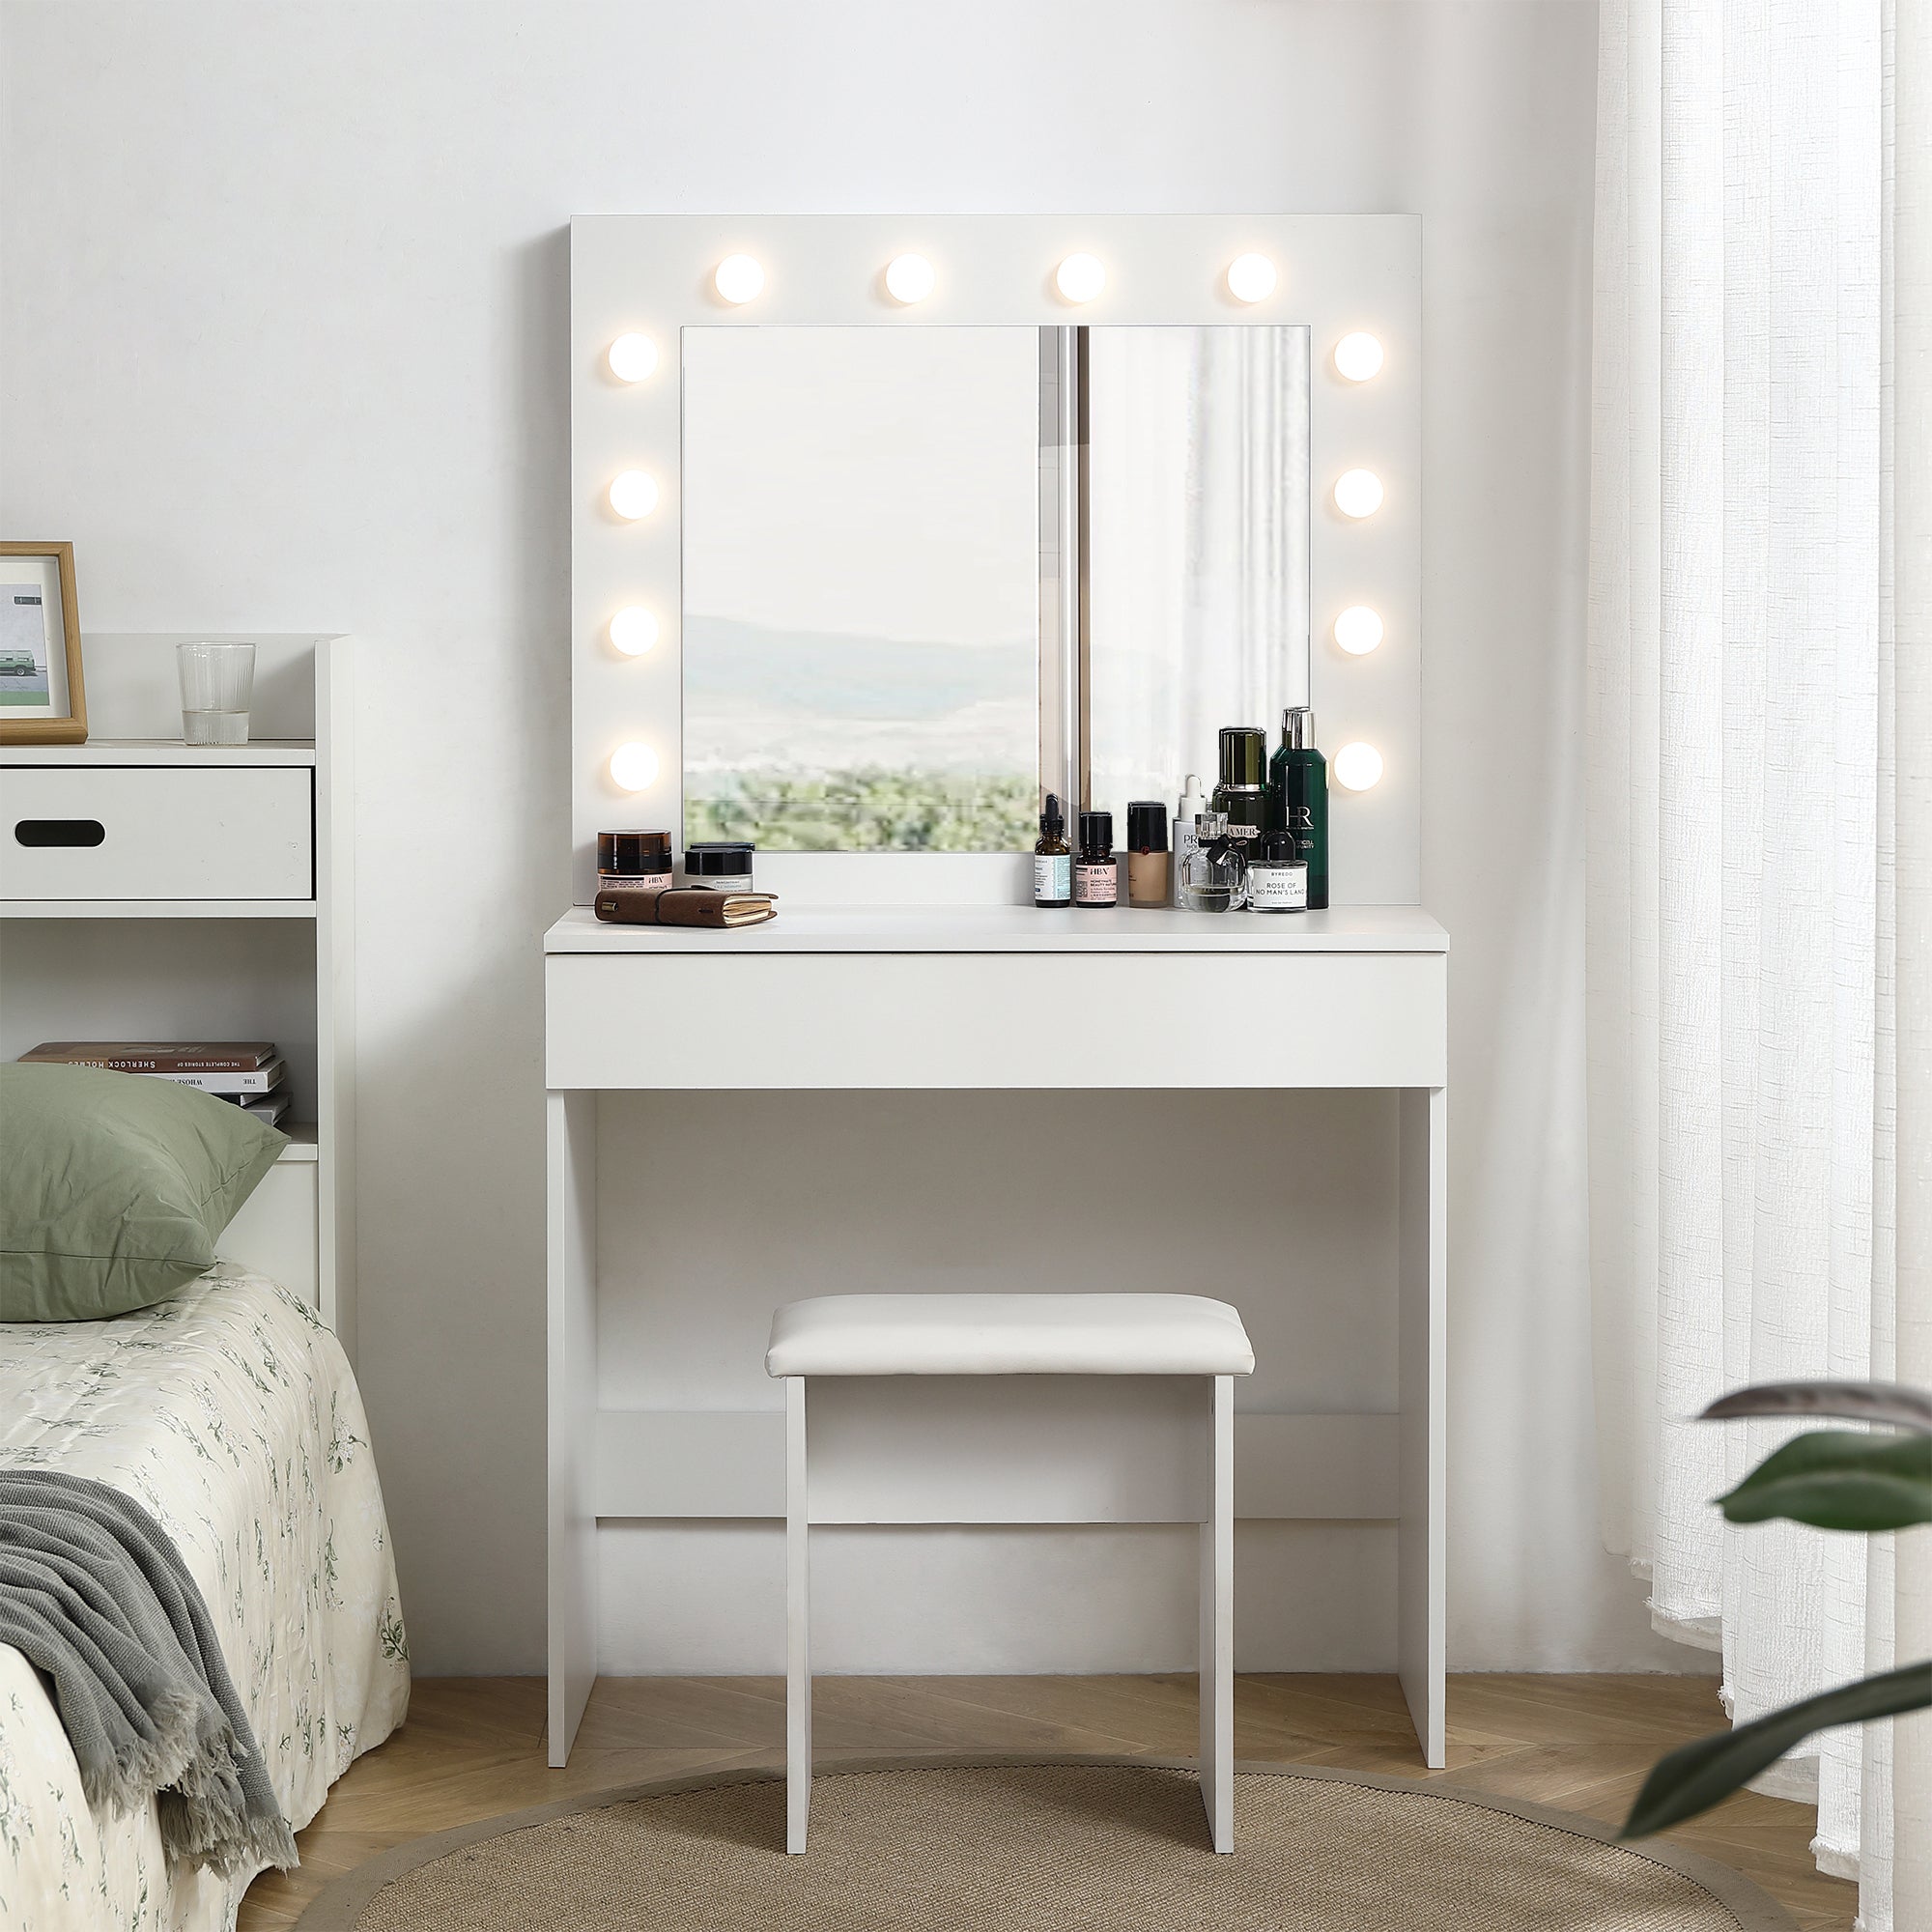 Vanity-table-with-large-lighted-mirror,-makeup-vanity-dressing-table-with-drawer,-1pc-upholstered-stool-,12-light-bulbs-and-adjustable-brightness,-white-color-VANITY